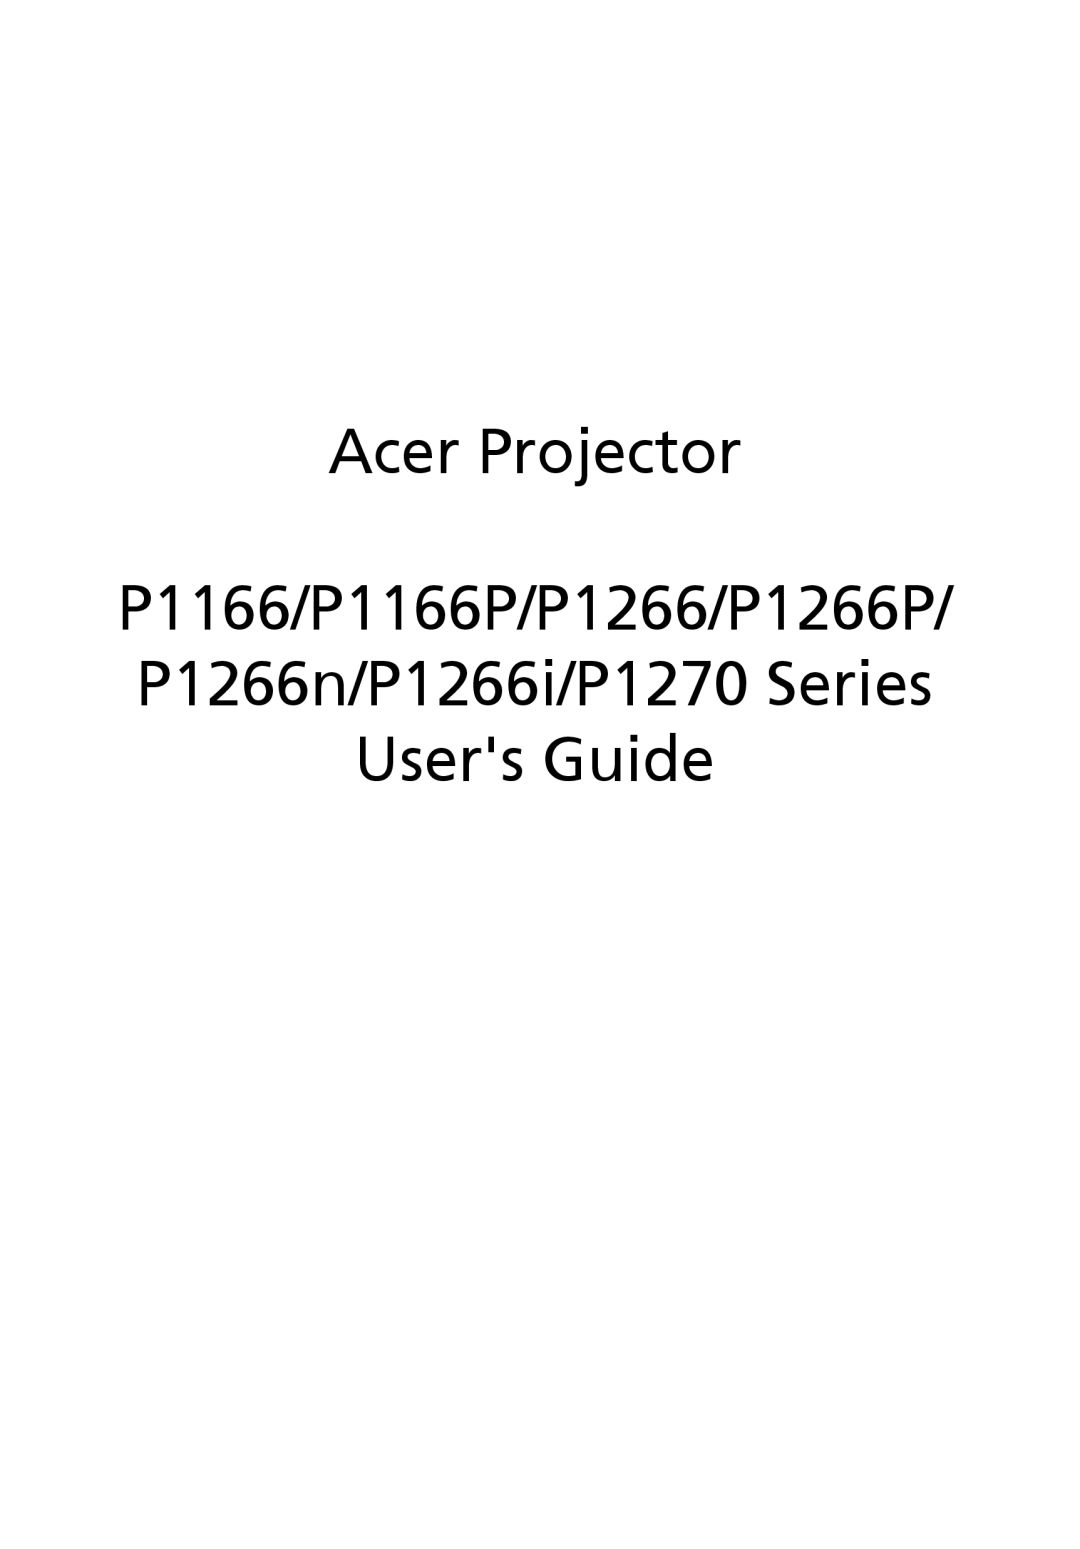 Acer P1266N manual Acer Projector P1166/P1166P/P1266/P1266P P1266n/P1266i/P1270 Series, Users Guide 